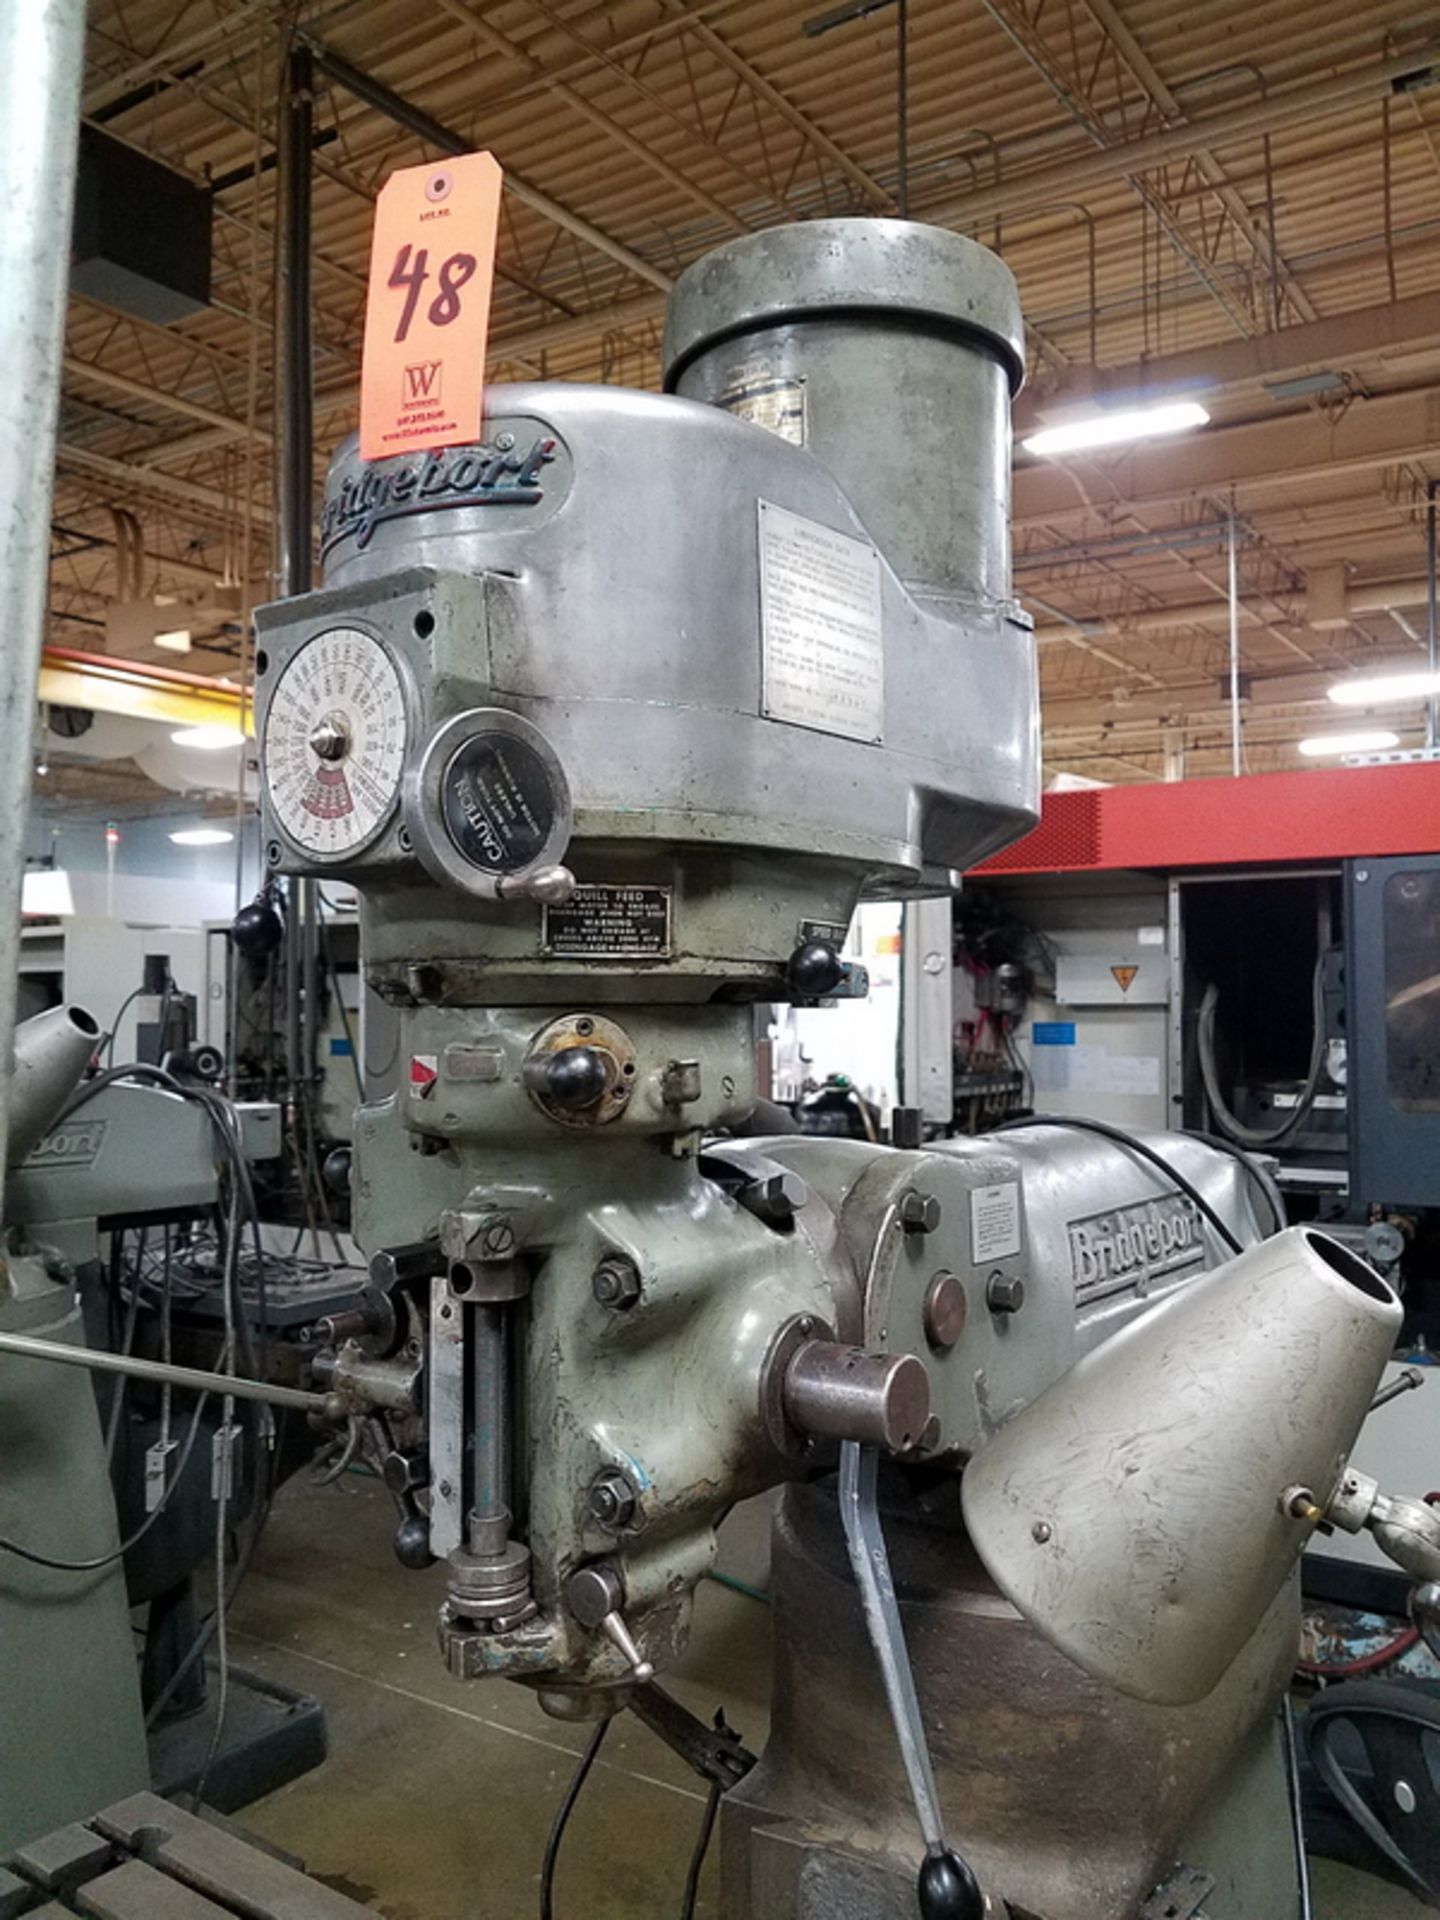 Bridgeport 1-1/2 HP Vertical Milling Machine, S/N: 167856; with R8 Spindle, 5 in. Quill - Image 4 of 5